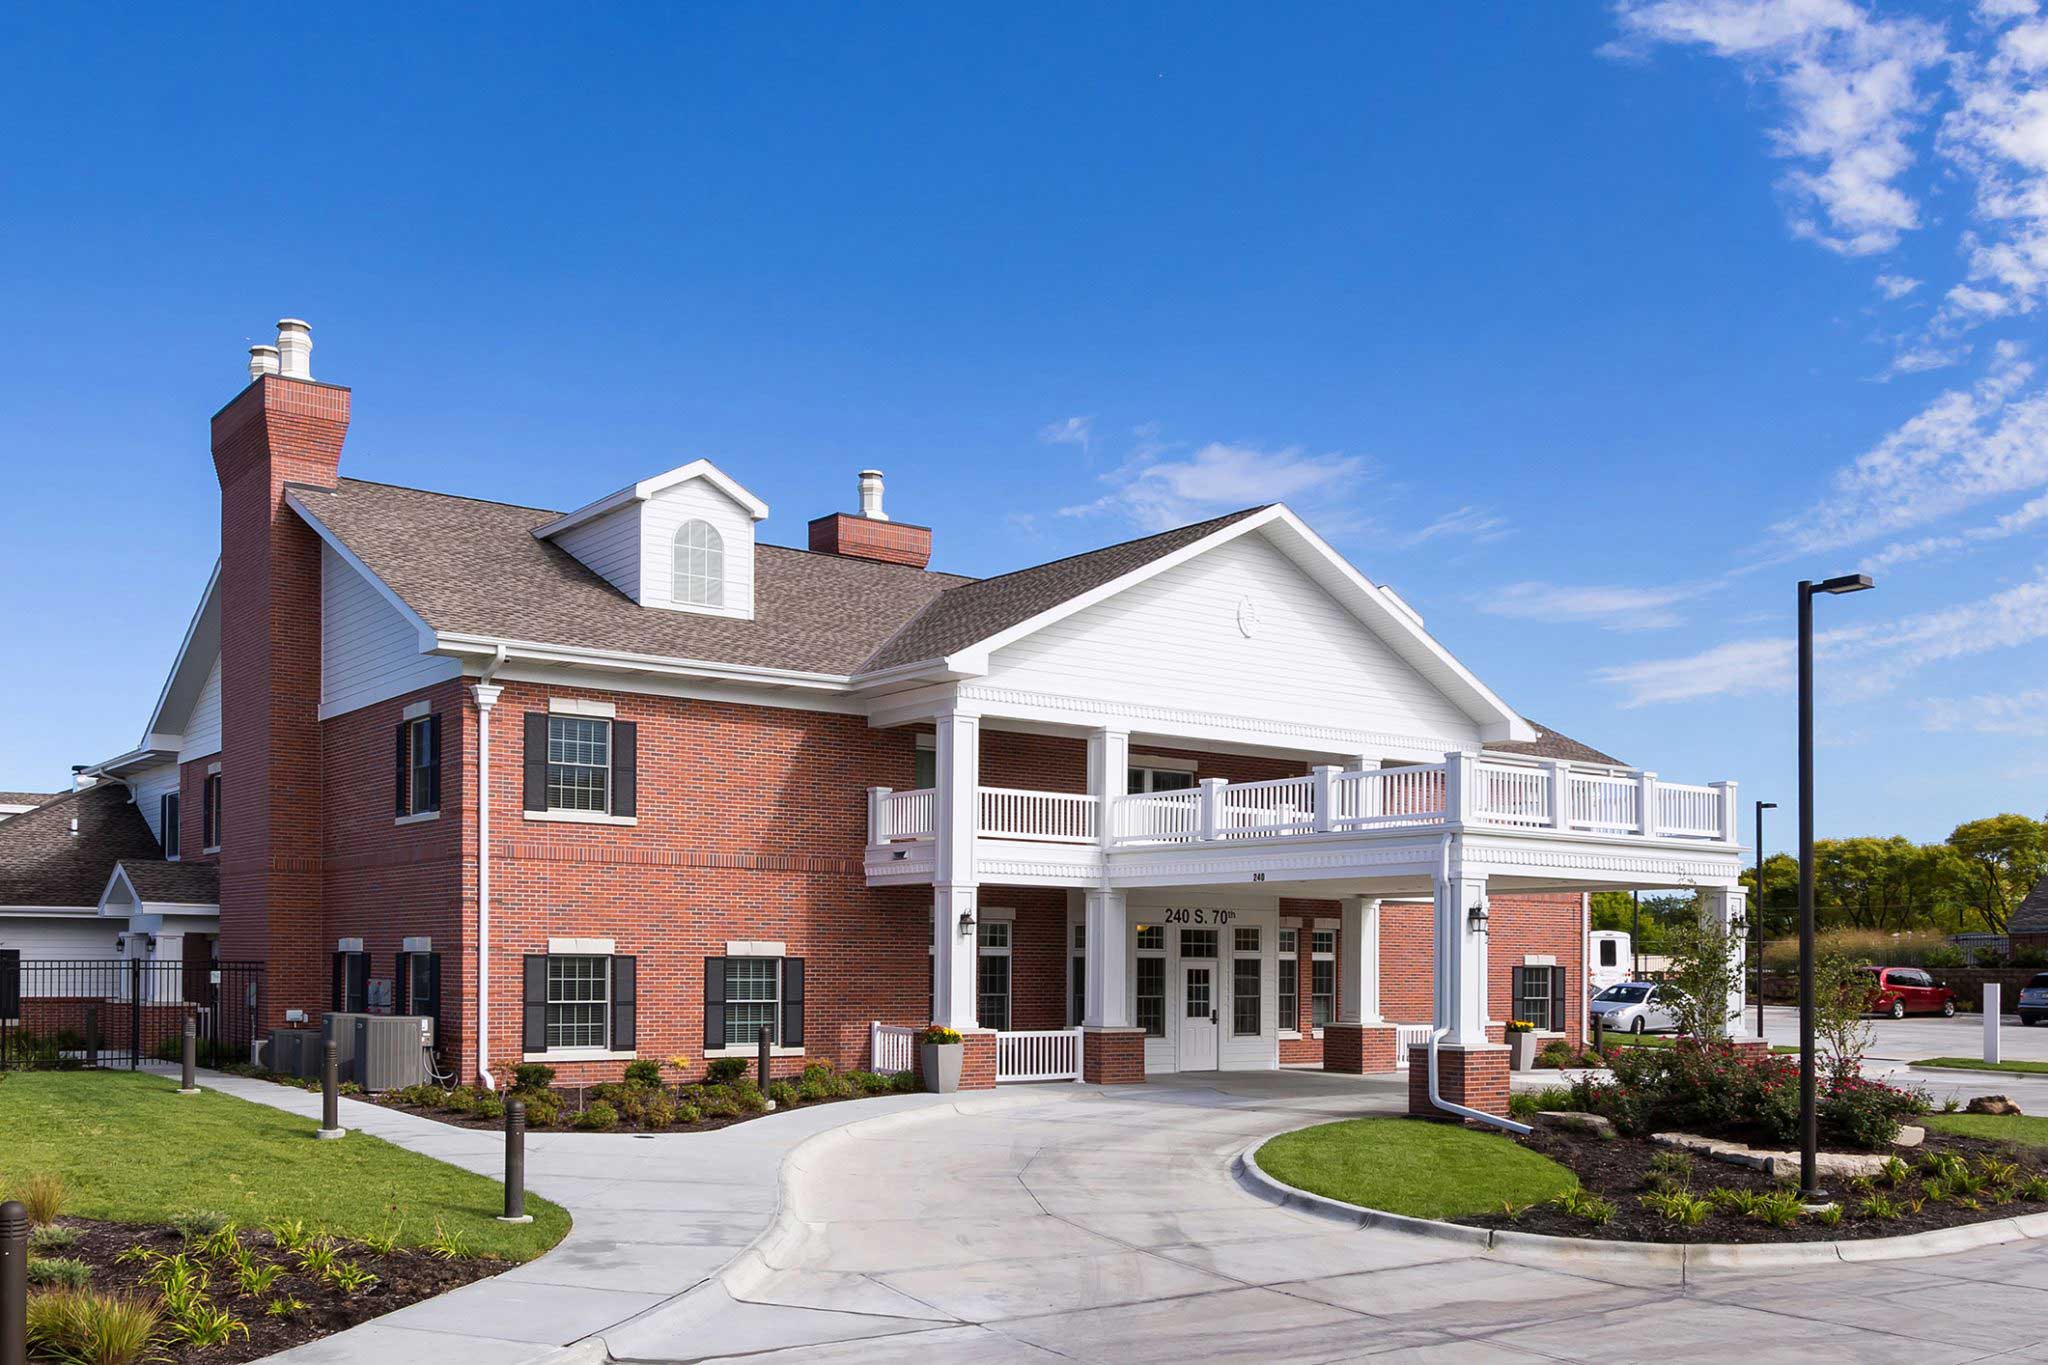 CountryHouse Residence For Memory Care | Memory Care Communities